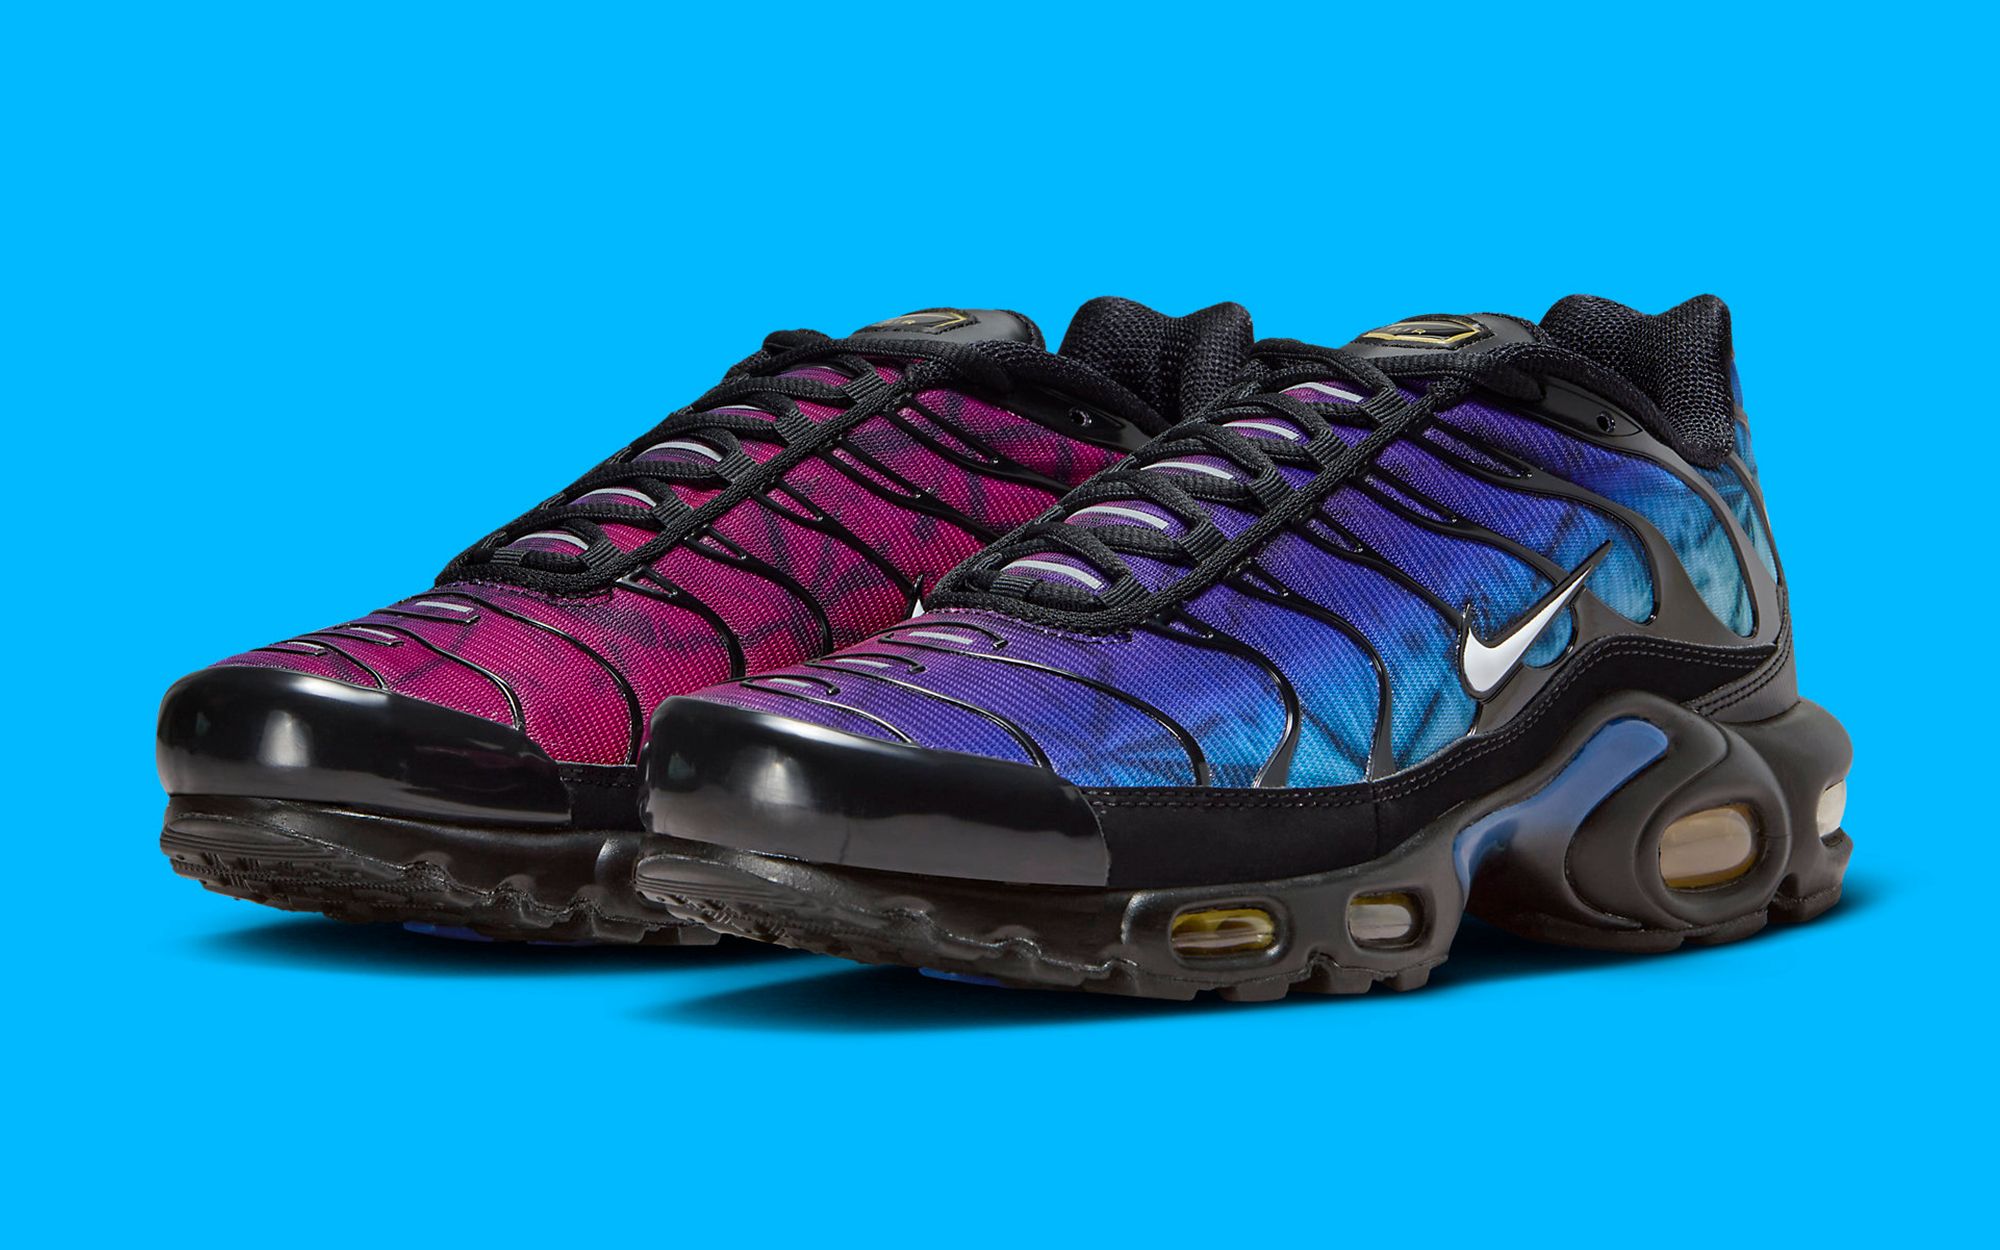 Nike Celebrate the Air Max Plus with 